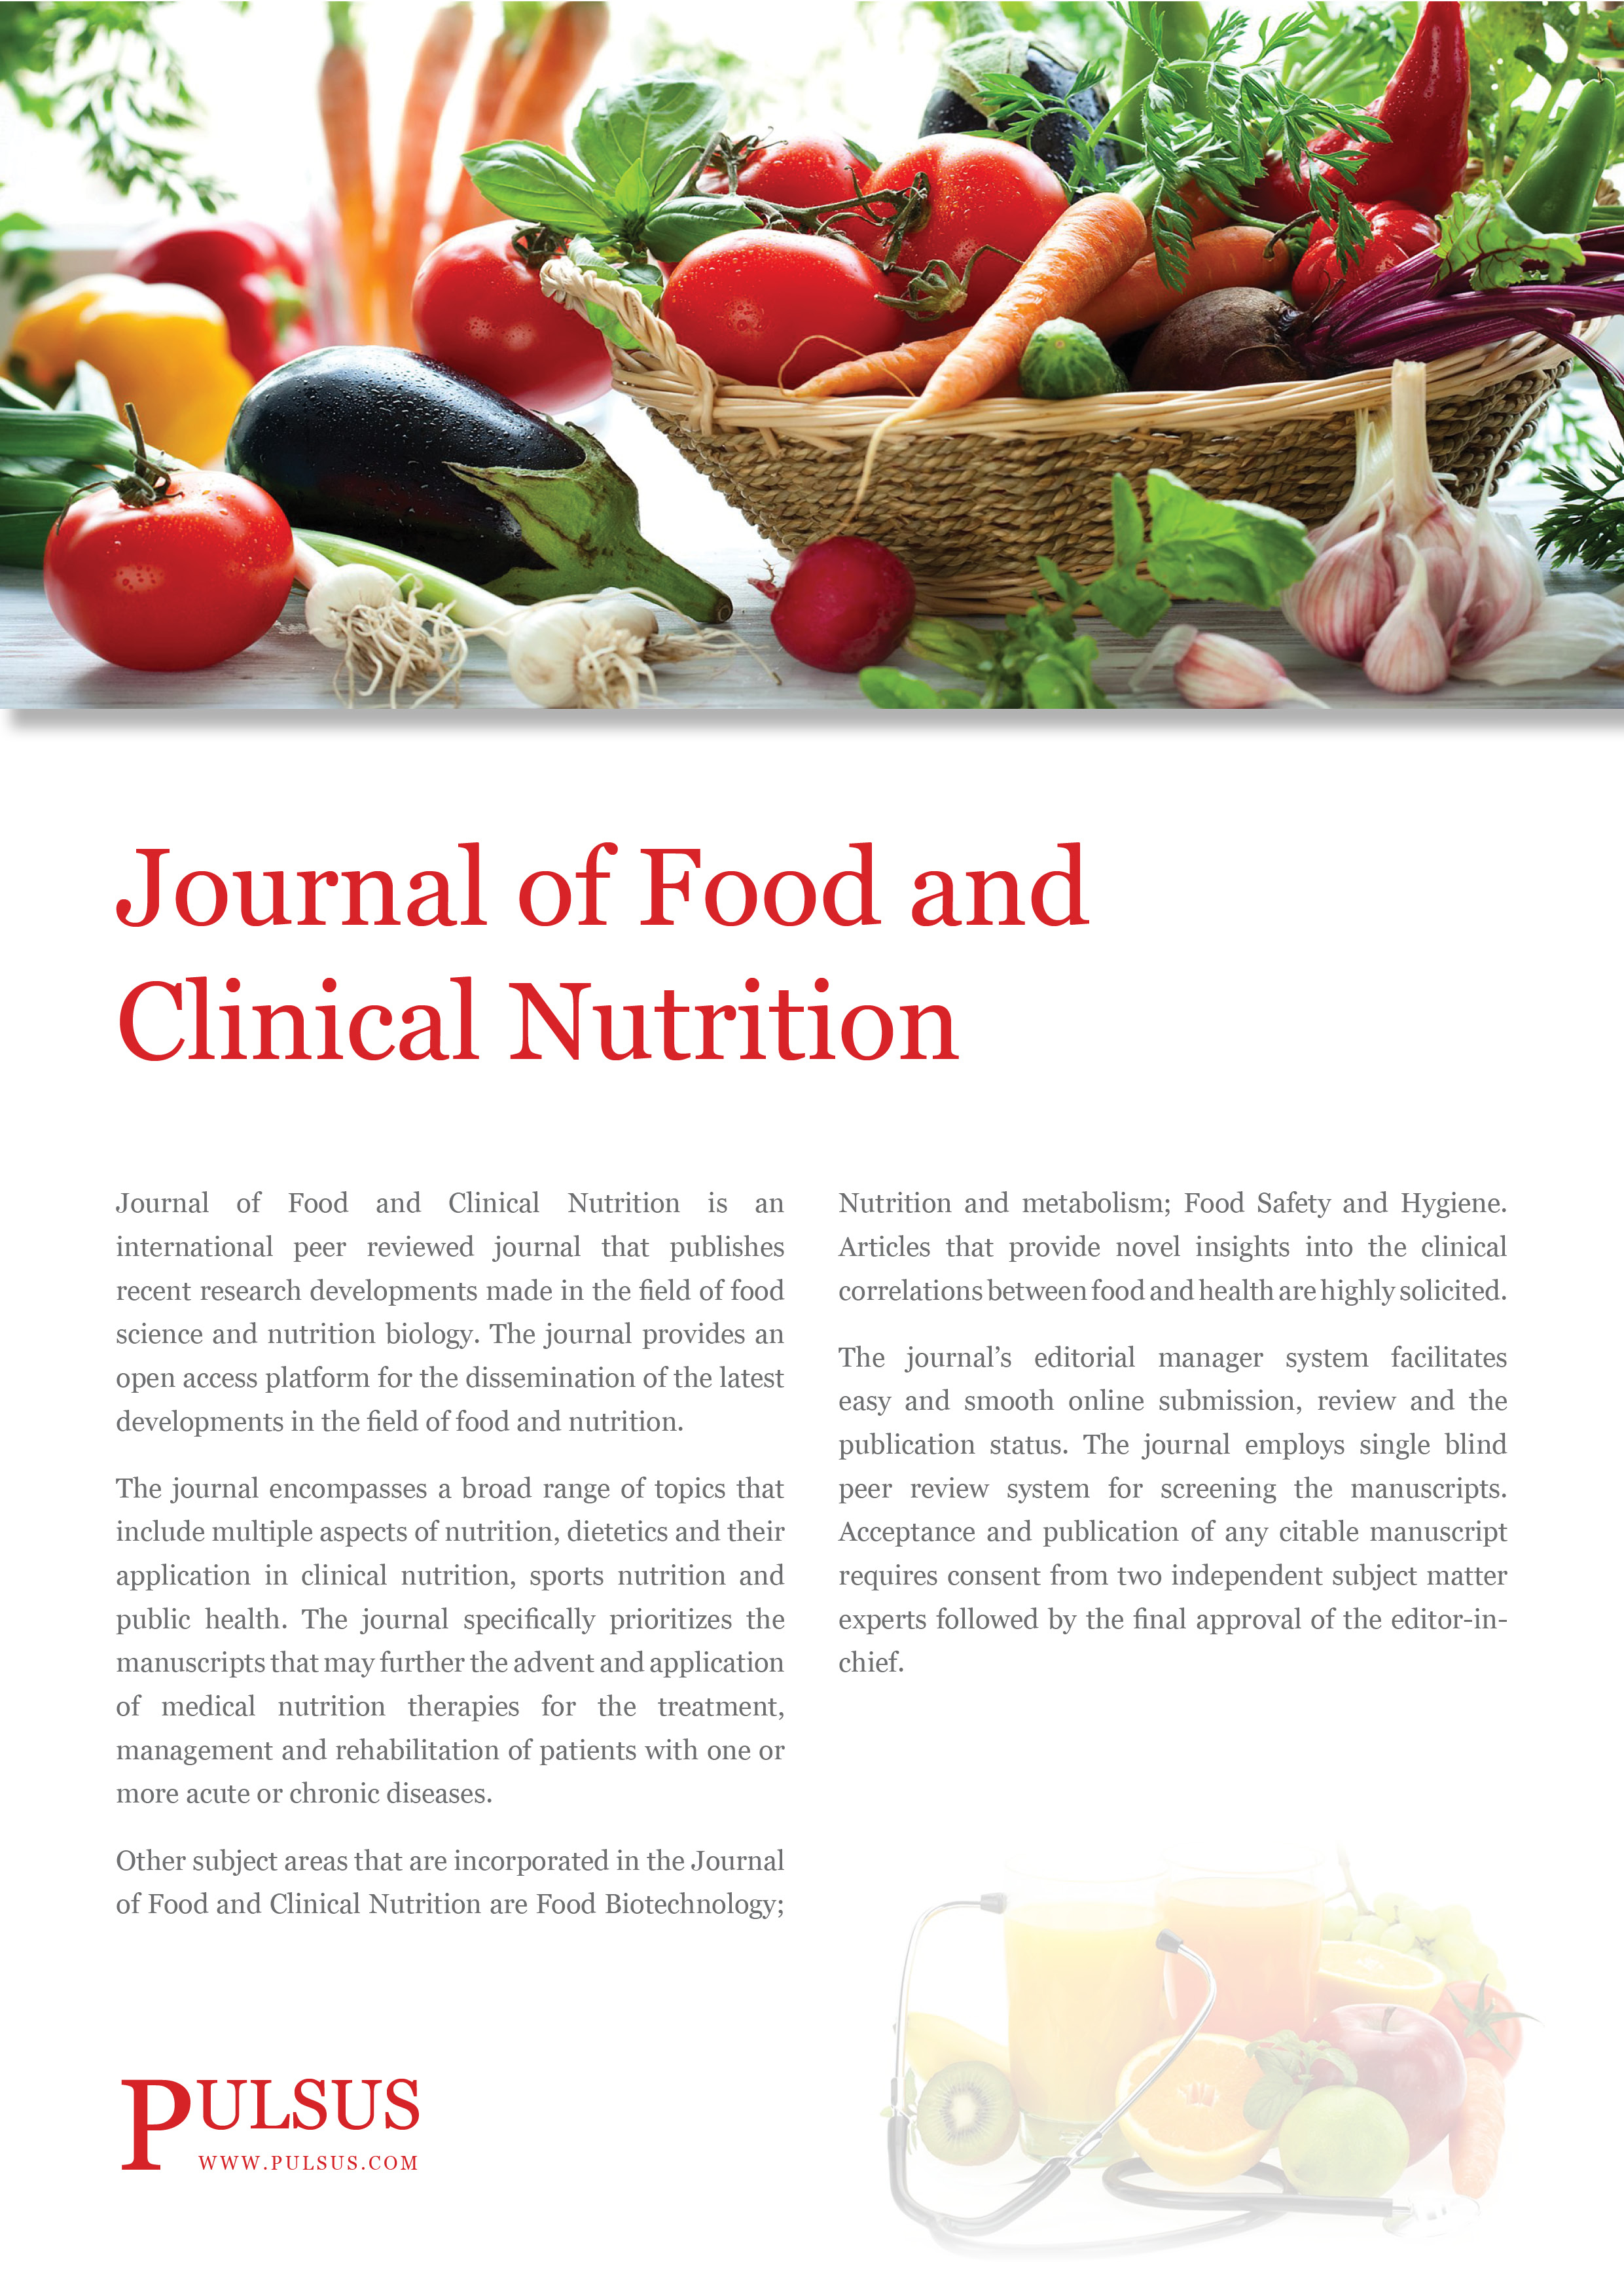 new recent research articles on nutrition